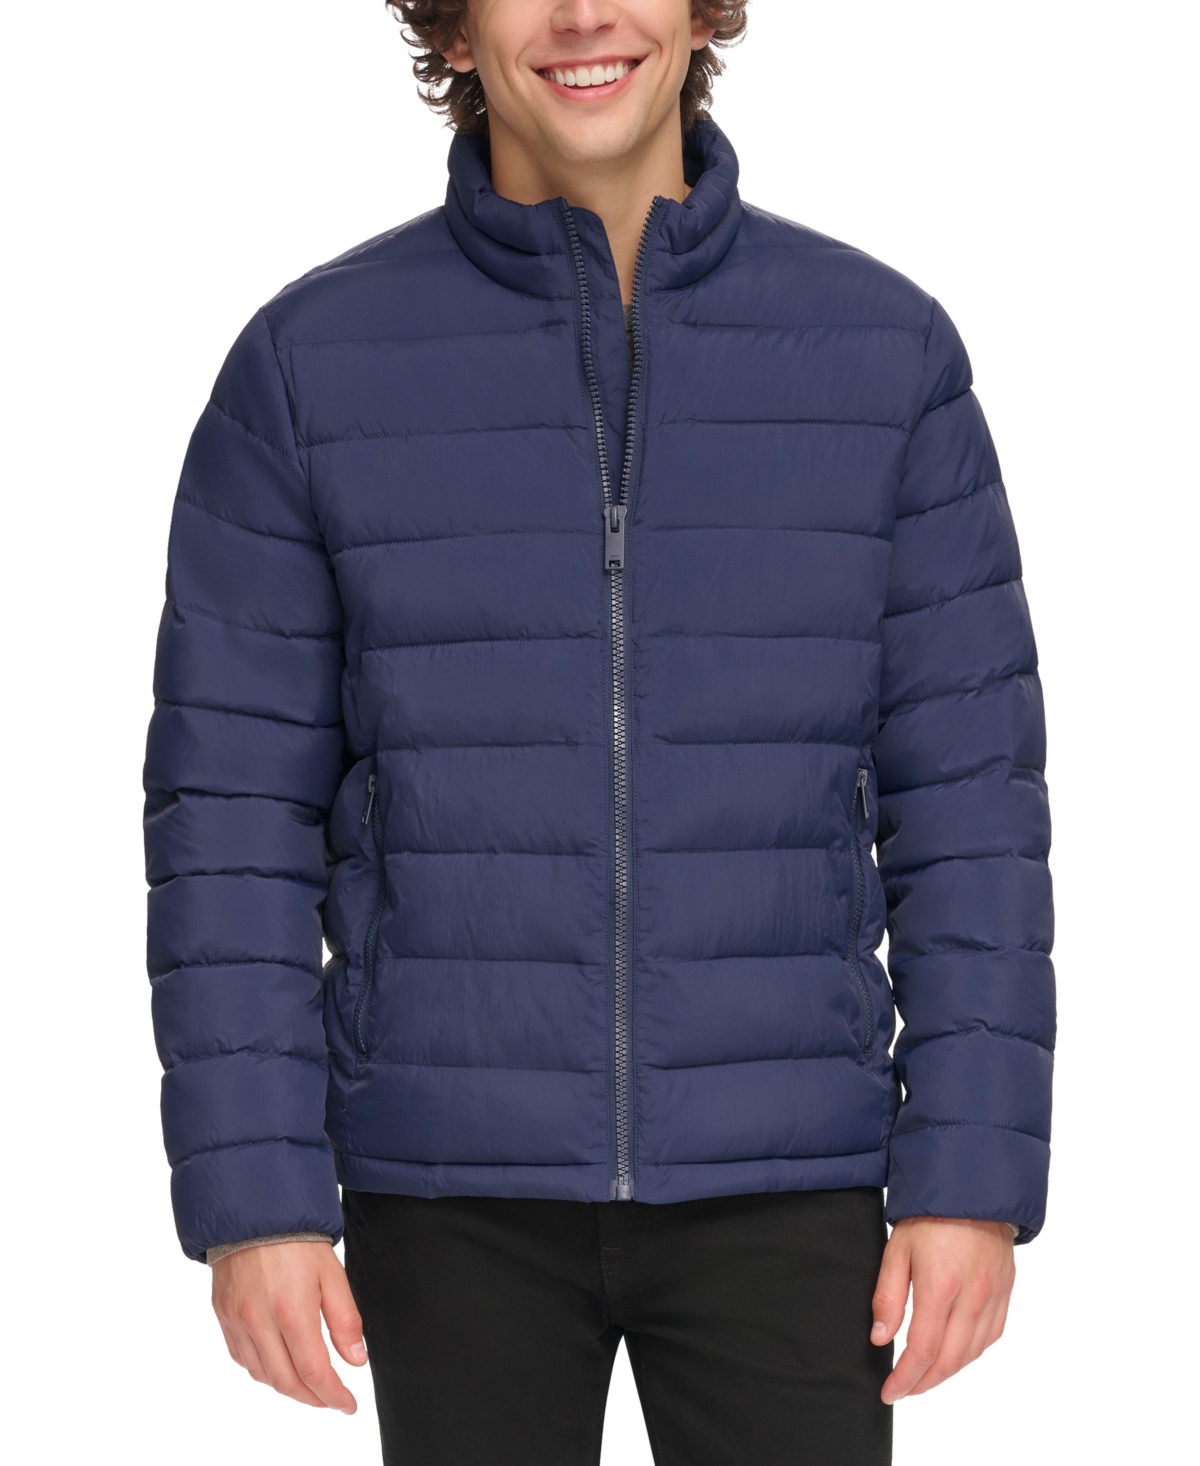 Men's Quilted Full-Zip Stand Collar Puffer Jacket - Black